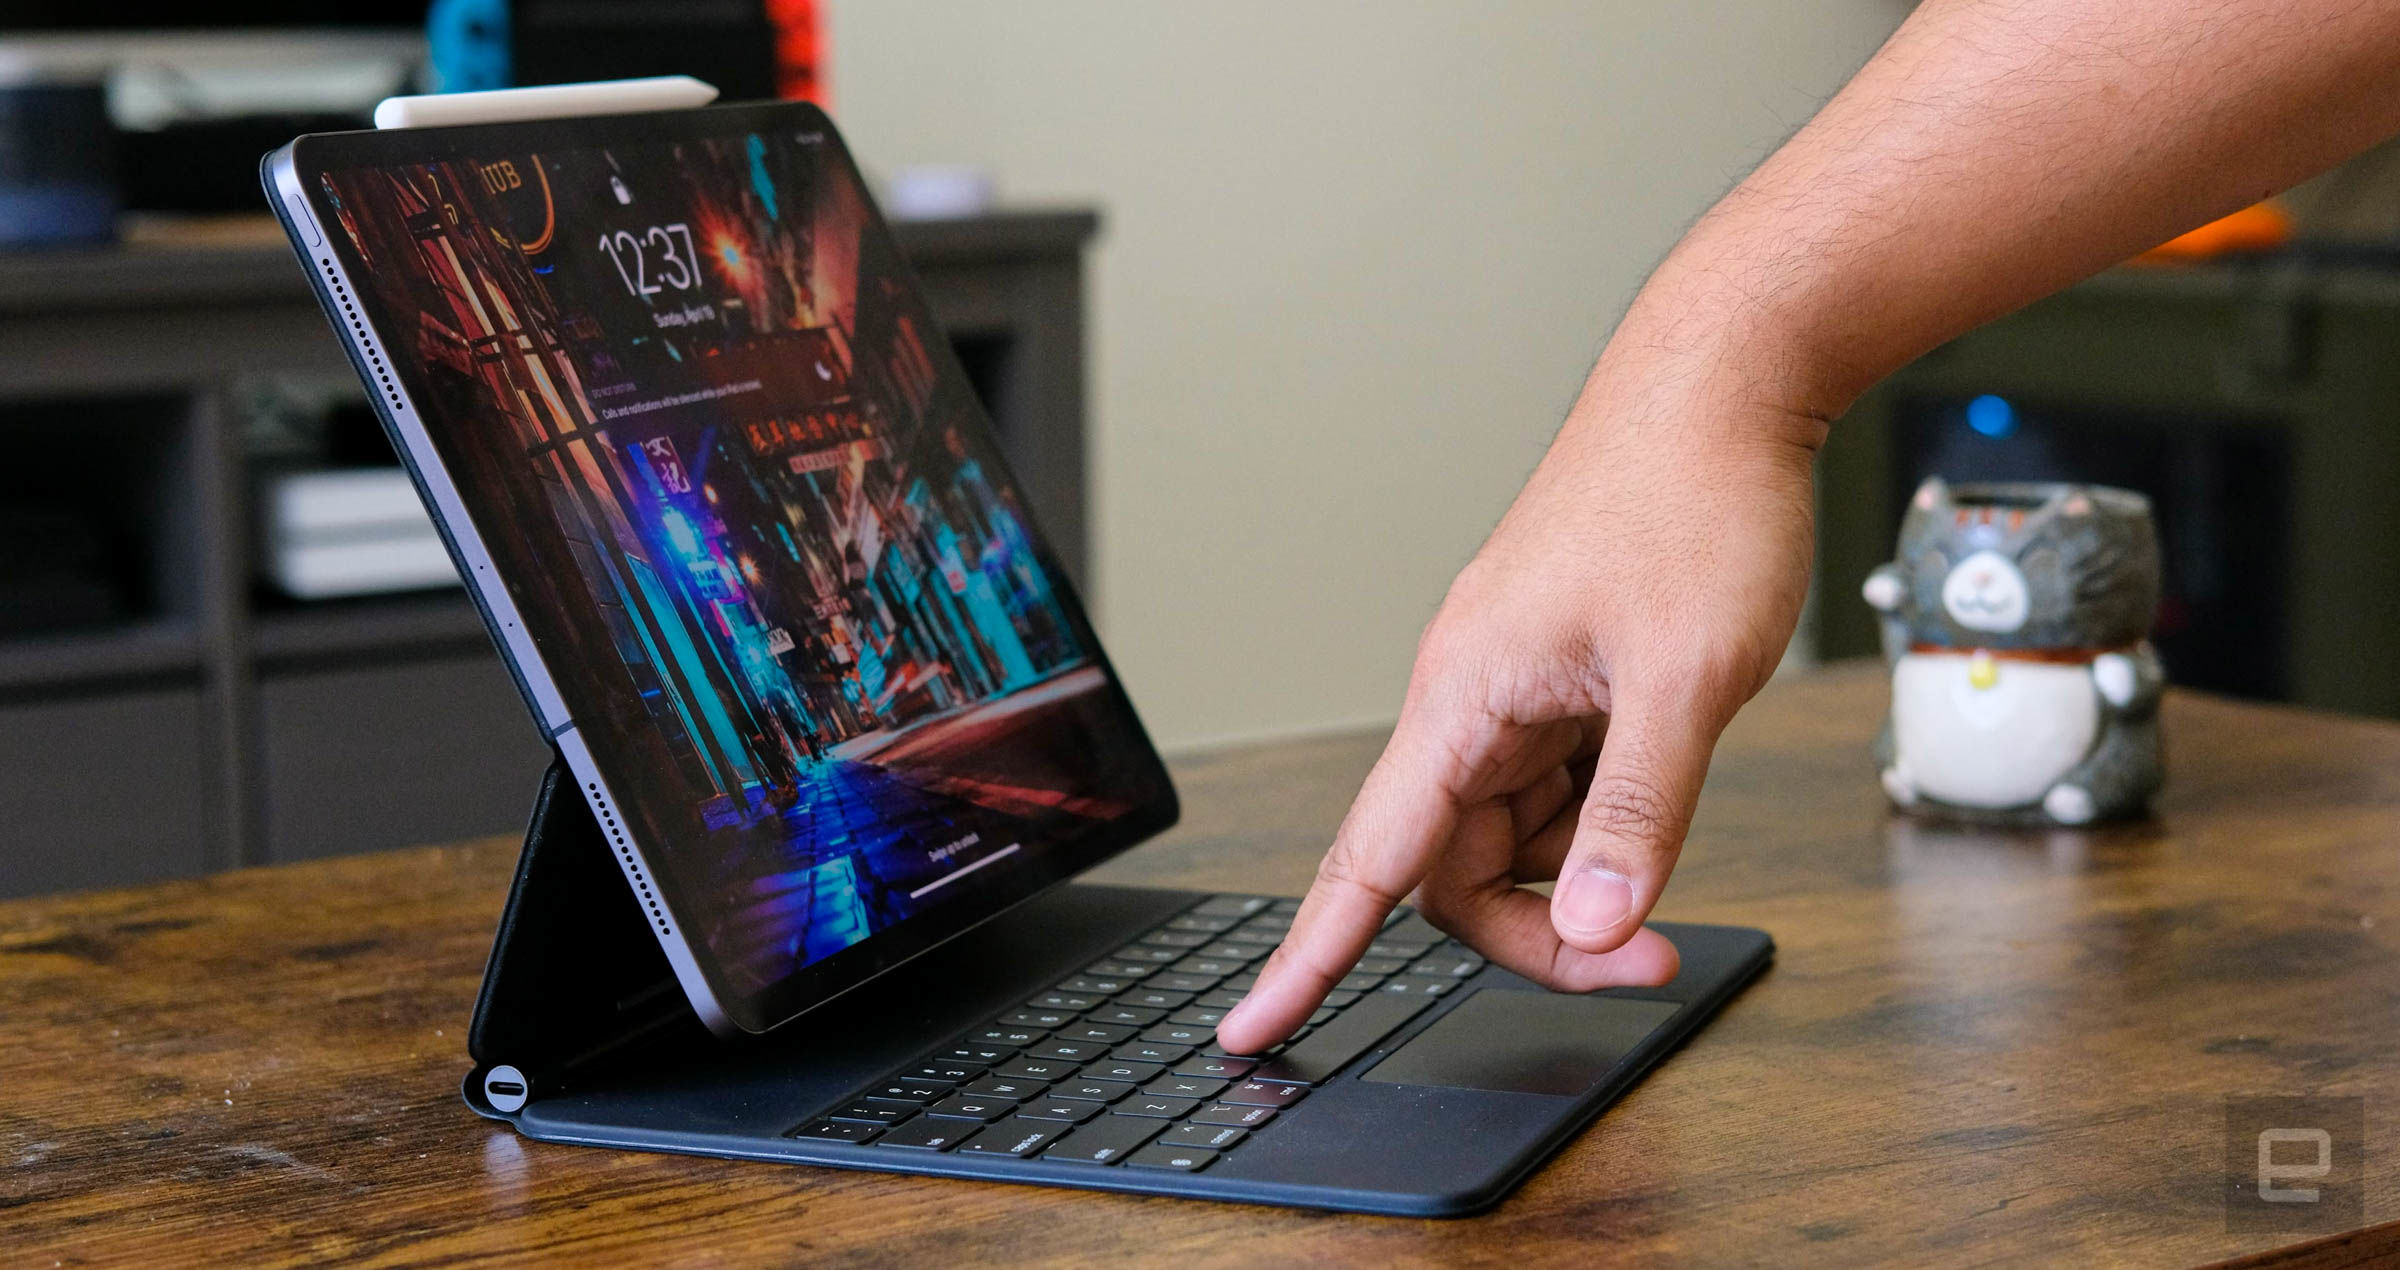 Apple's 12.9-inch Magic Keyboard for iPad is cheaper than ever at